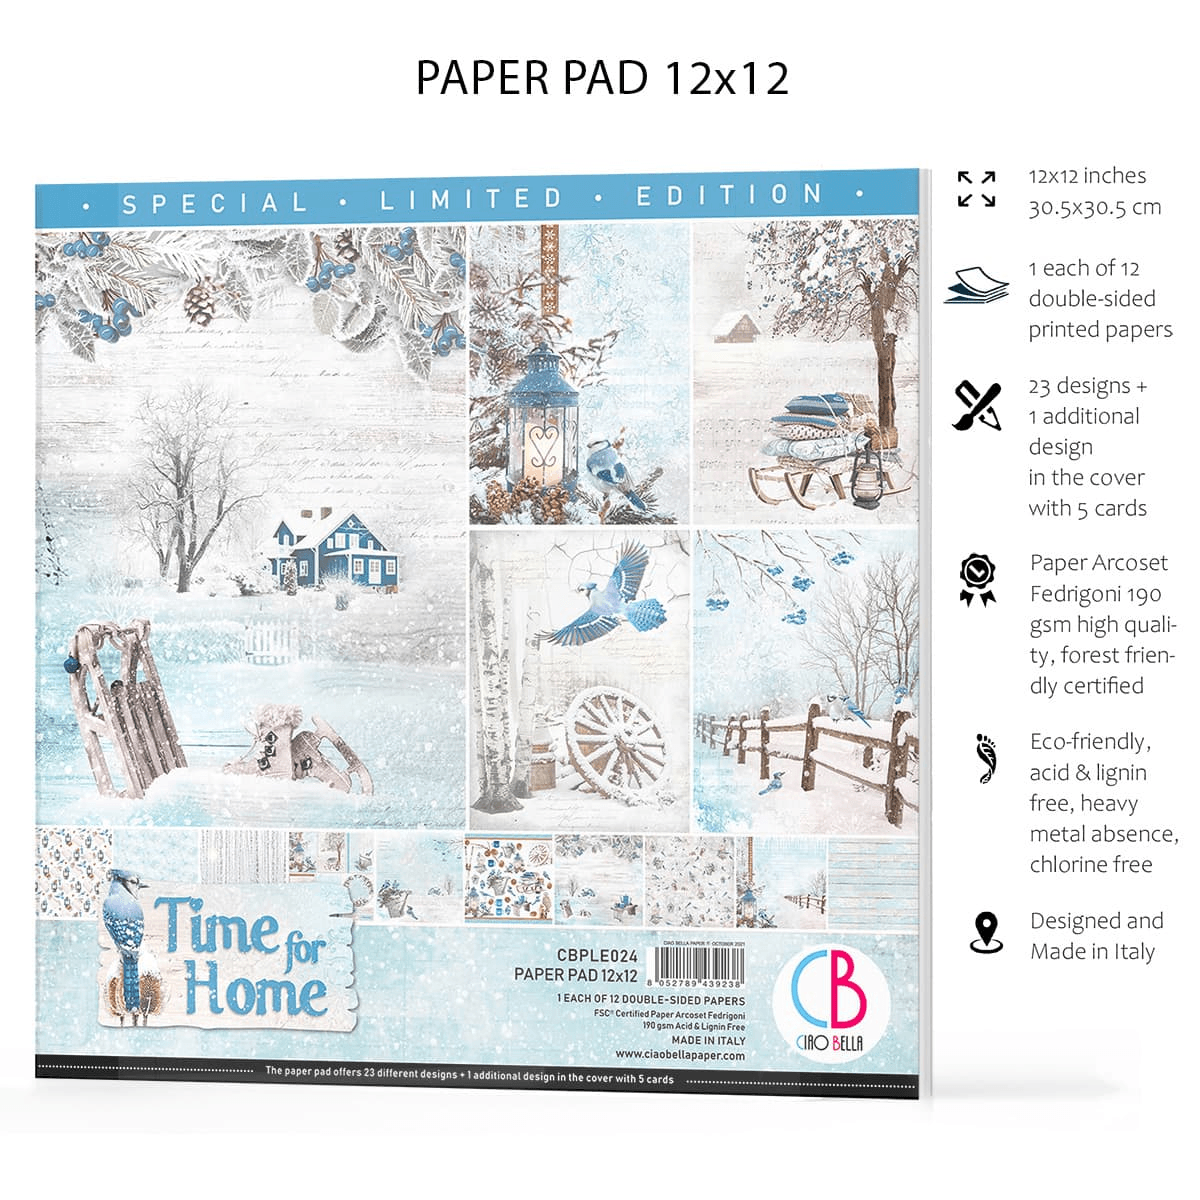 Ciao Bella - TIME FOR HOME LIMITED EDITION PAPER PAD - 12 x 12 - Messy Papercrafts